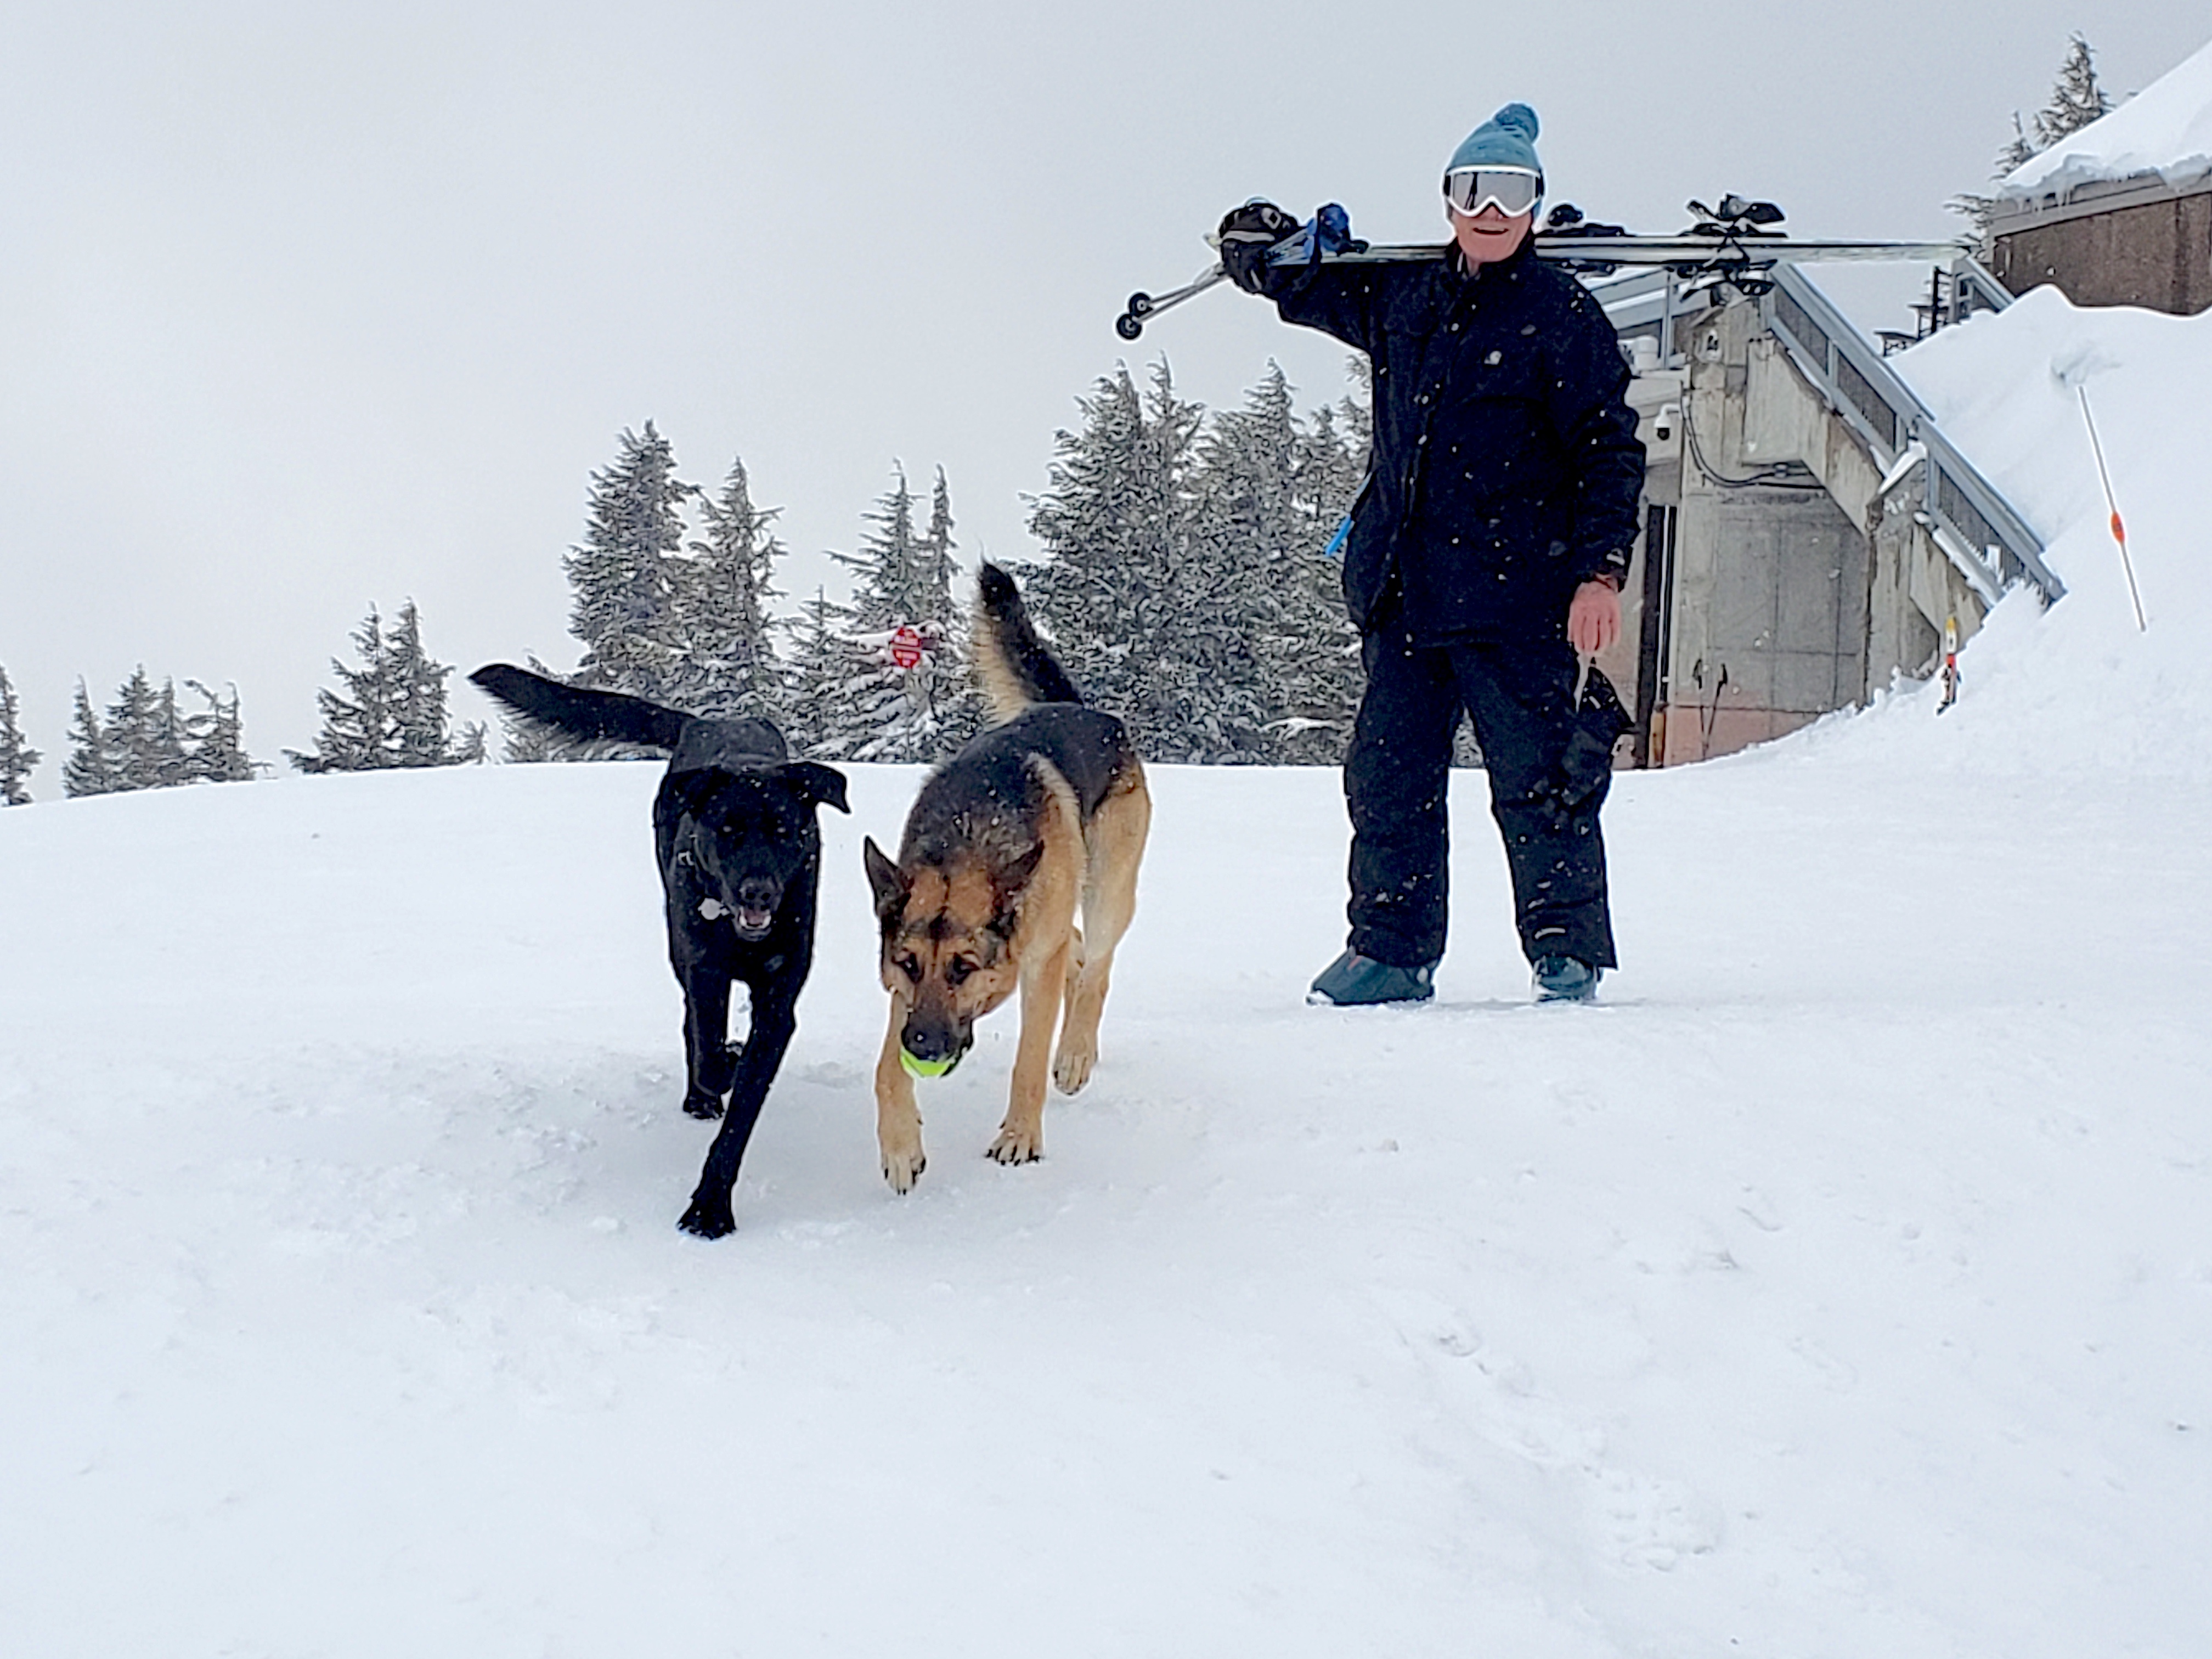 Picture of Ray & dogs in snow 3/20/2022